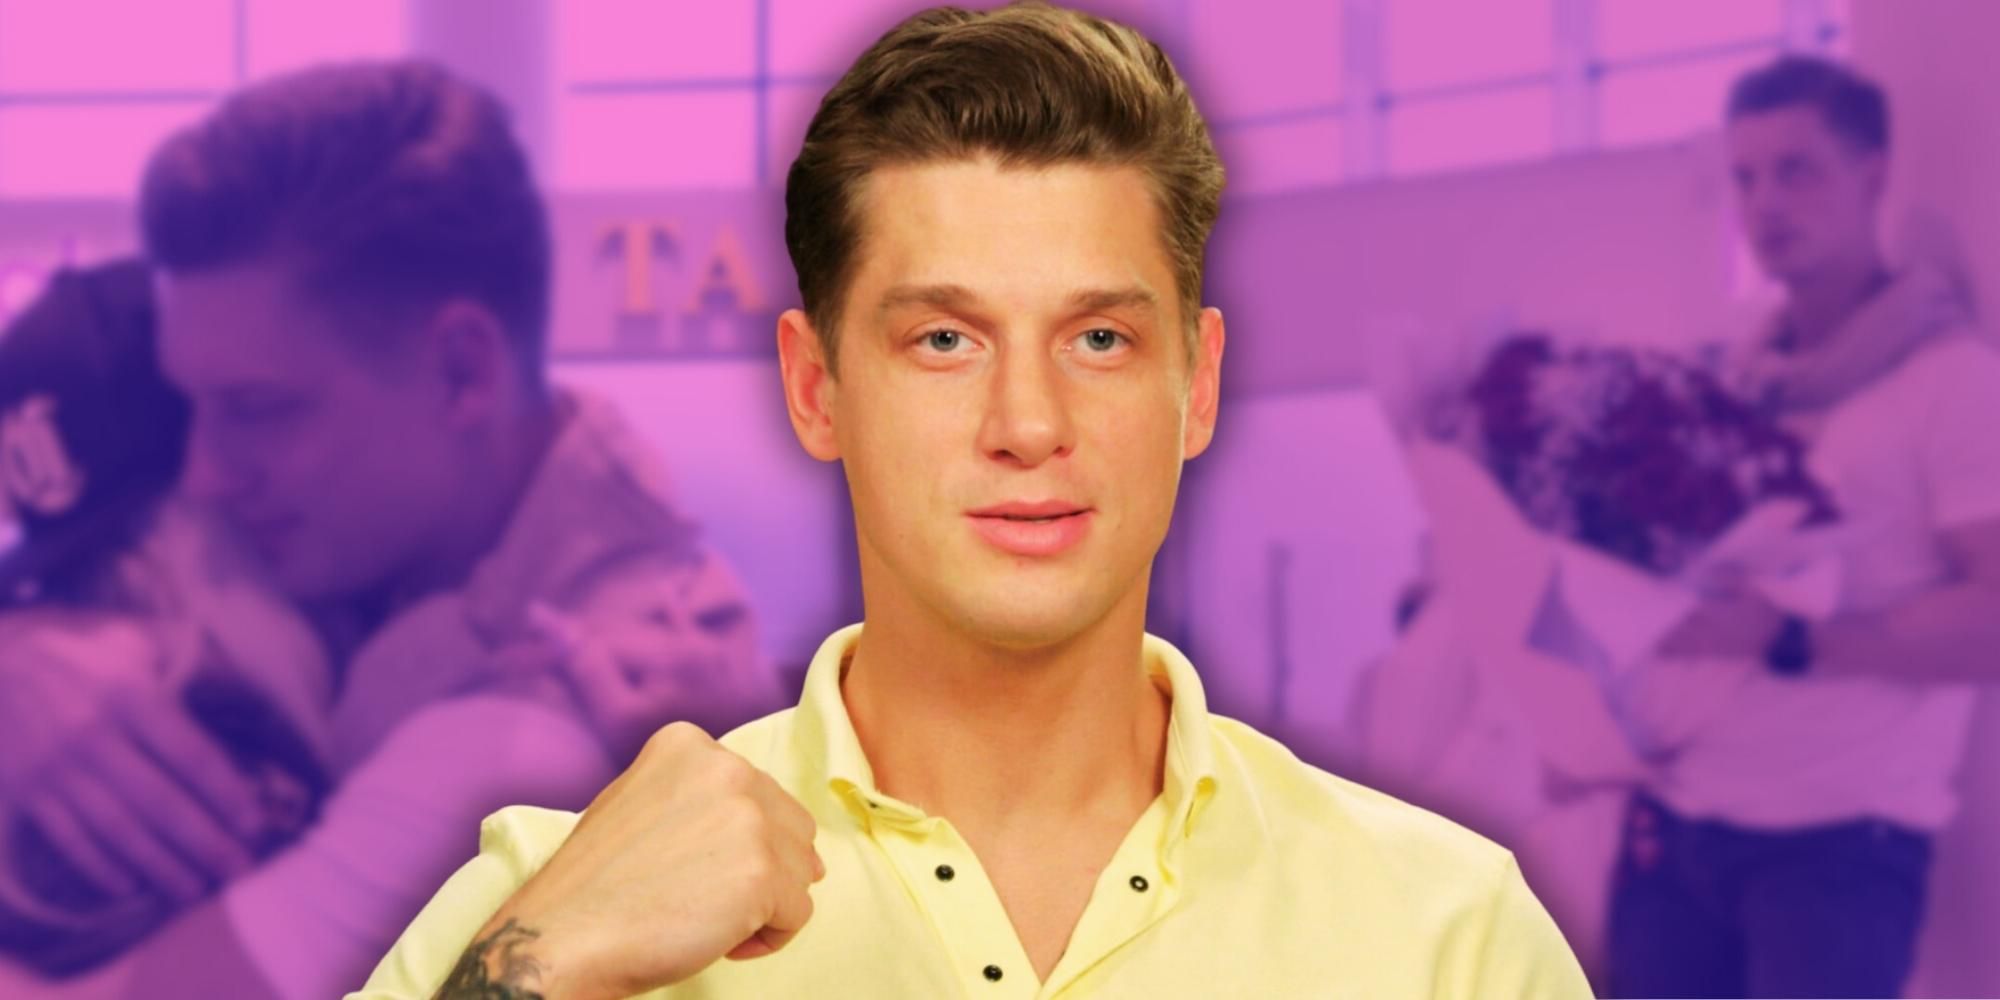 nikki justin 90 day fiance montage purple background where he wears a yellow polo neck shirt with his hand in a fist